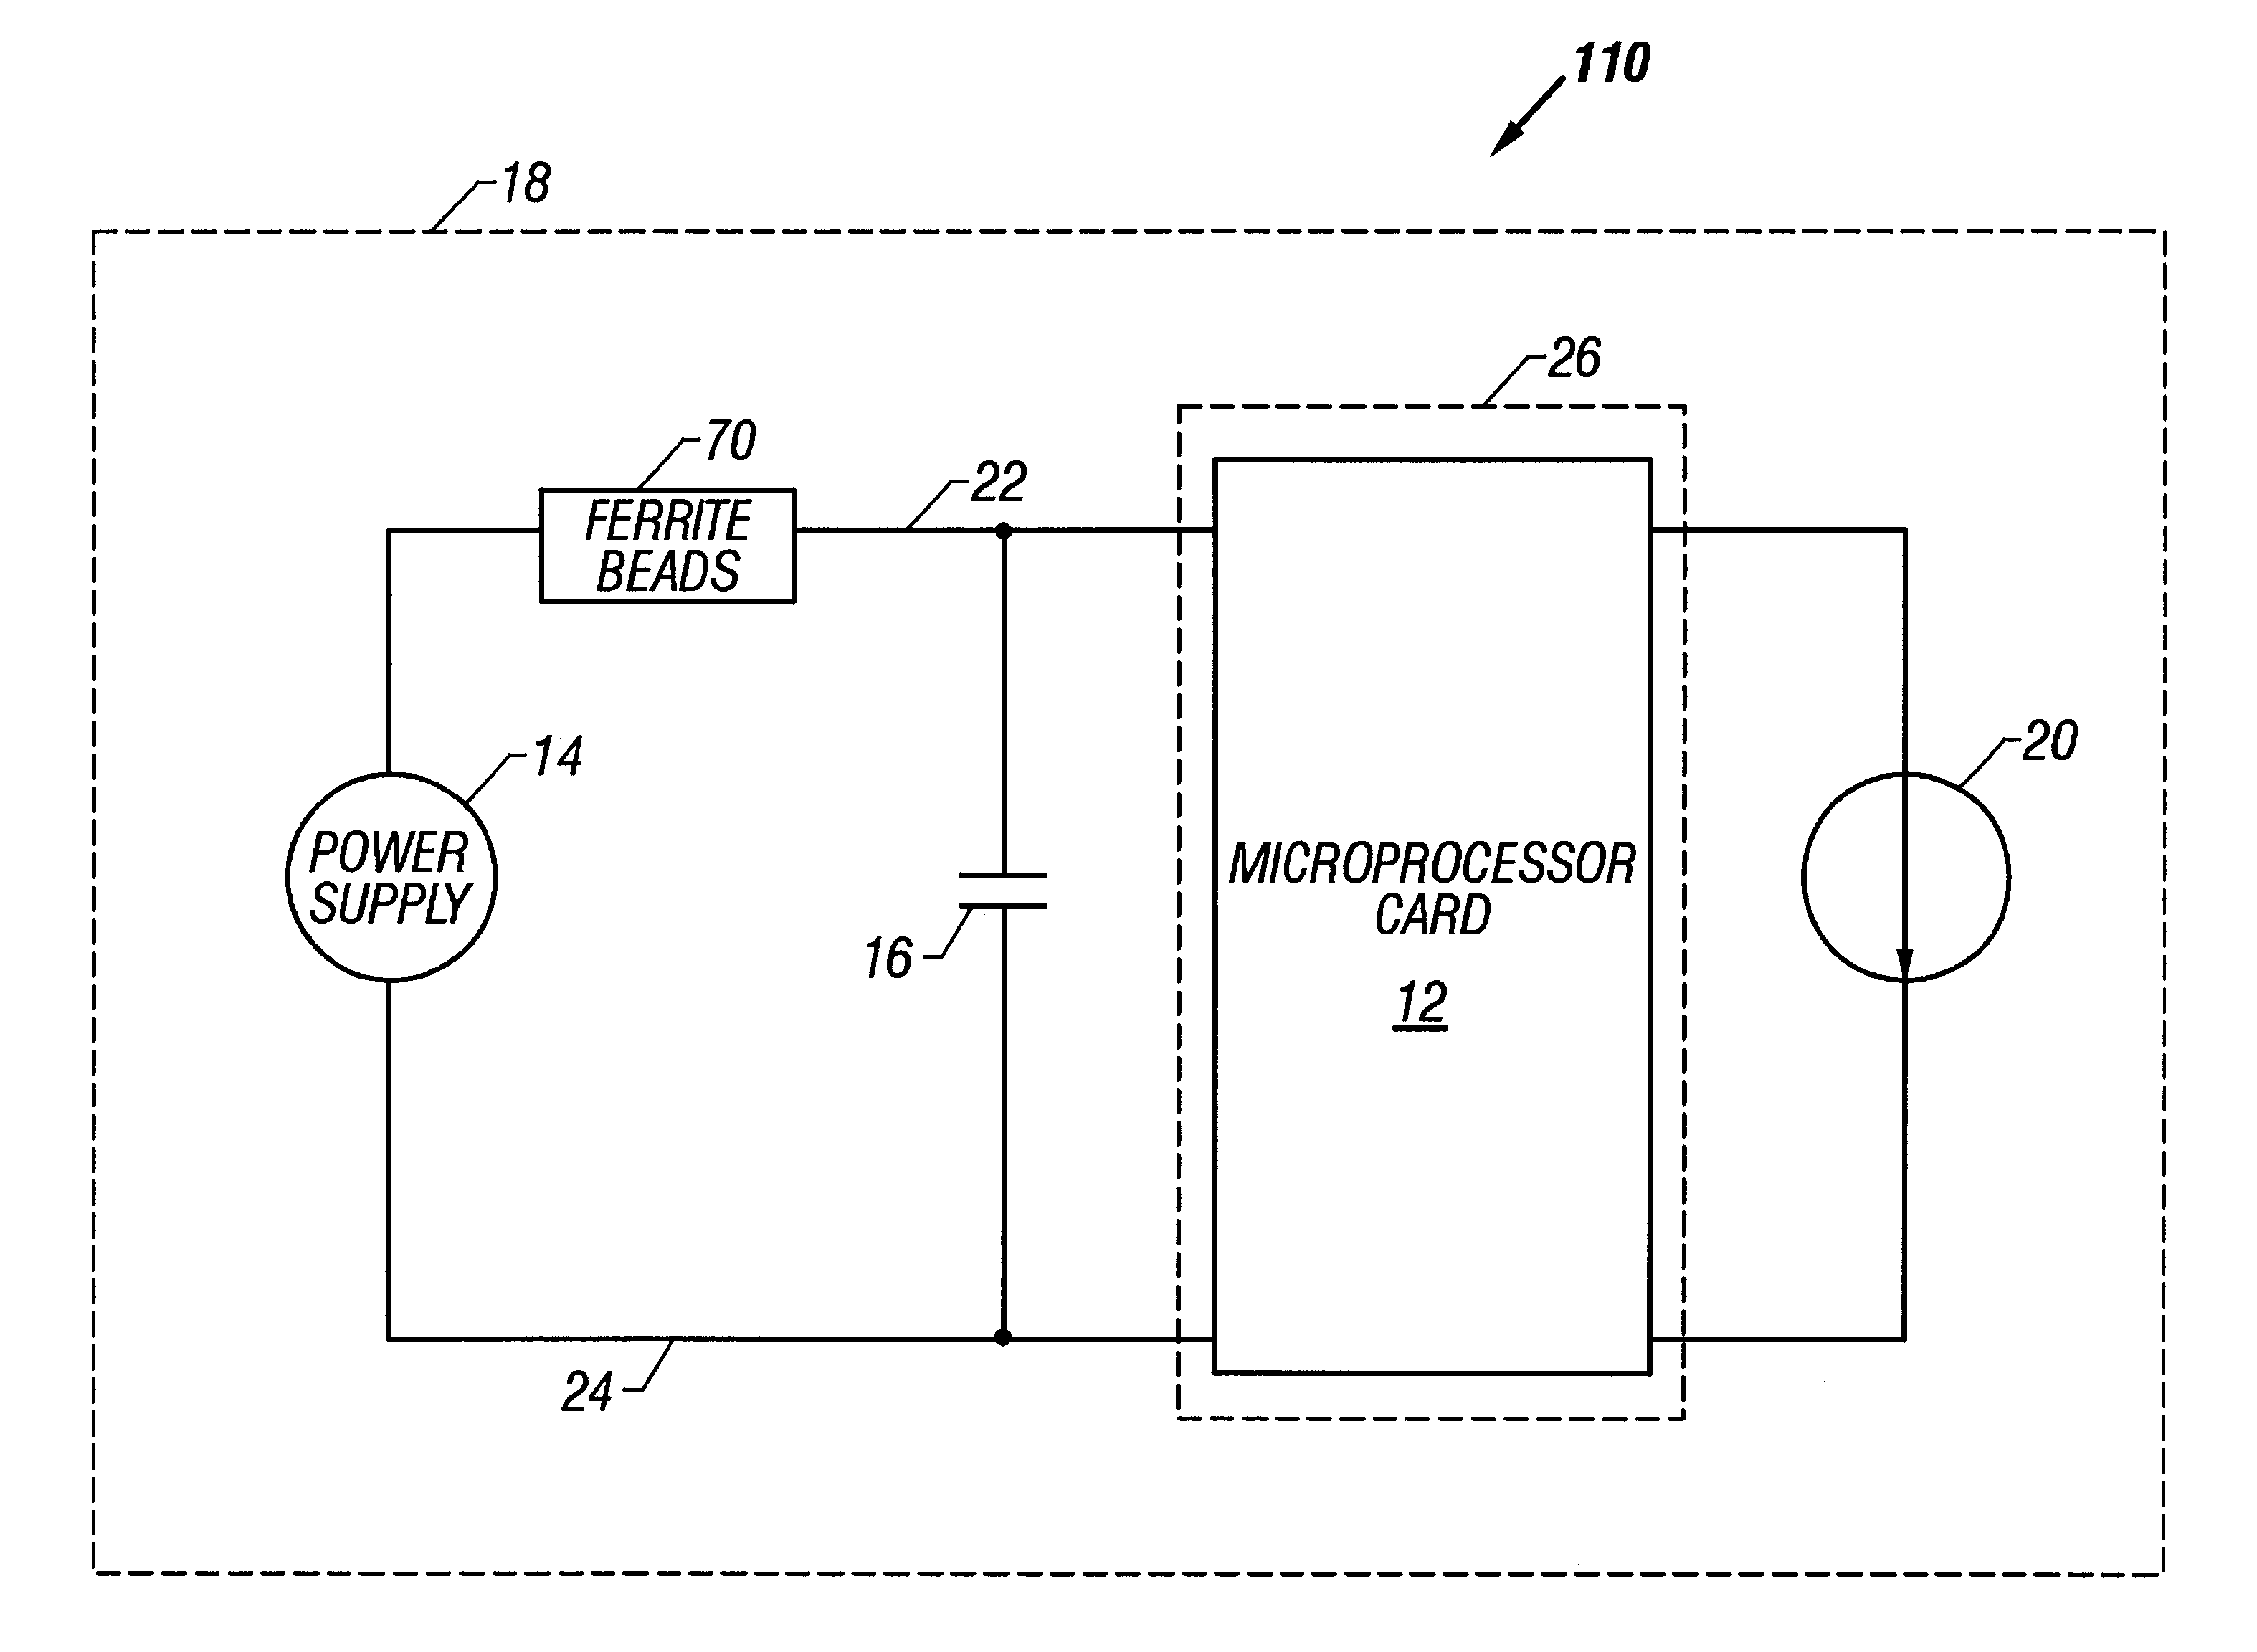 Apparatus and method for minimizing electromagnetic interference in microcomputing systems